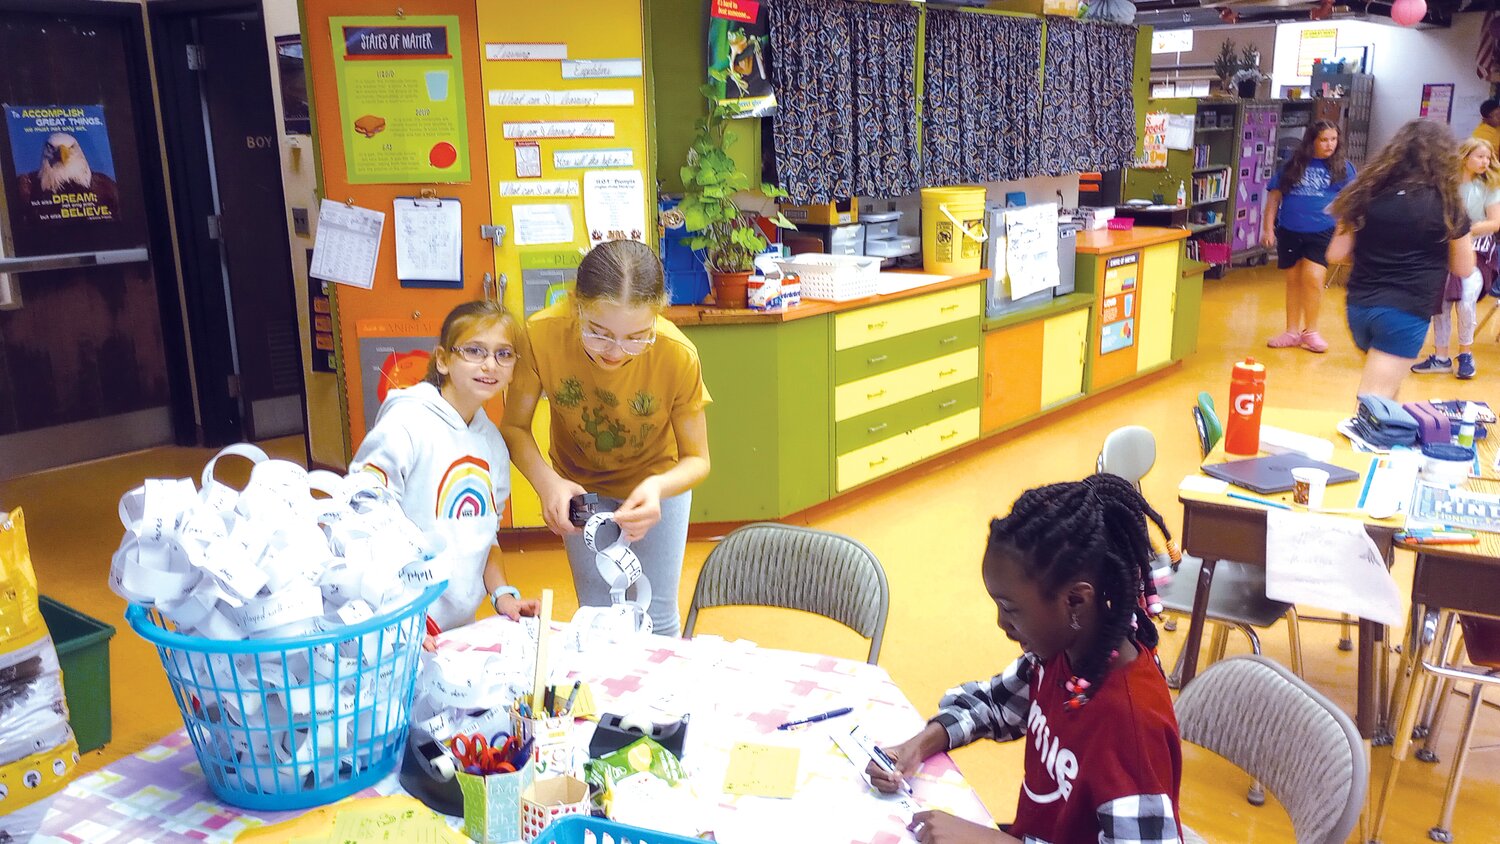 TEAMWORK: The room is abuzz with pride and effort as students work together to make their dream of bringing kindness to the school into a reality. (Herald photo by Ed Kdonian)